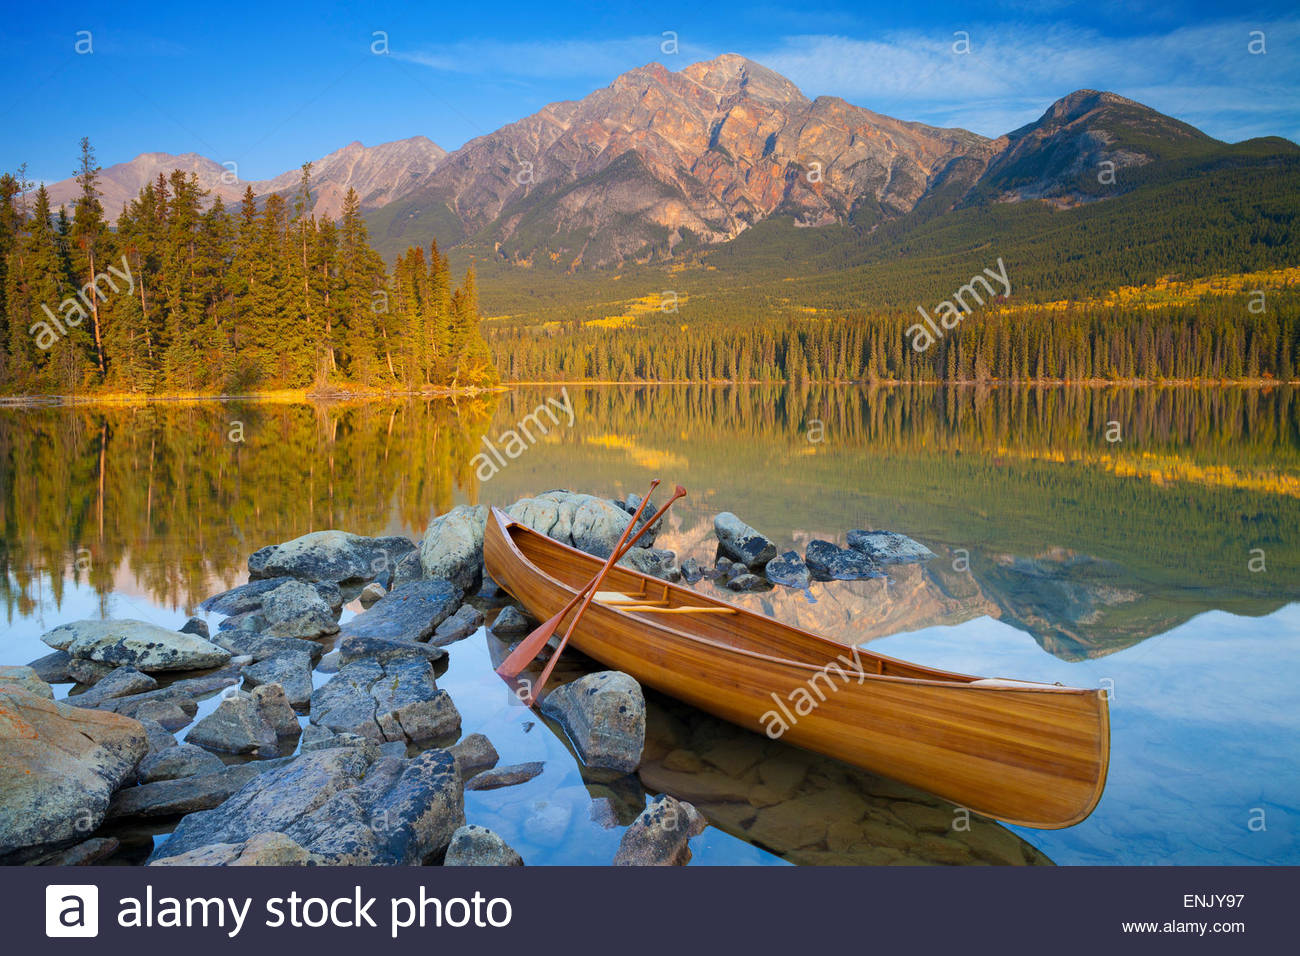 Canoe Pyramid Lake With Mountain In The Background